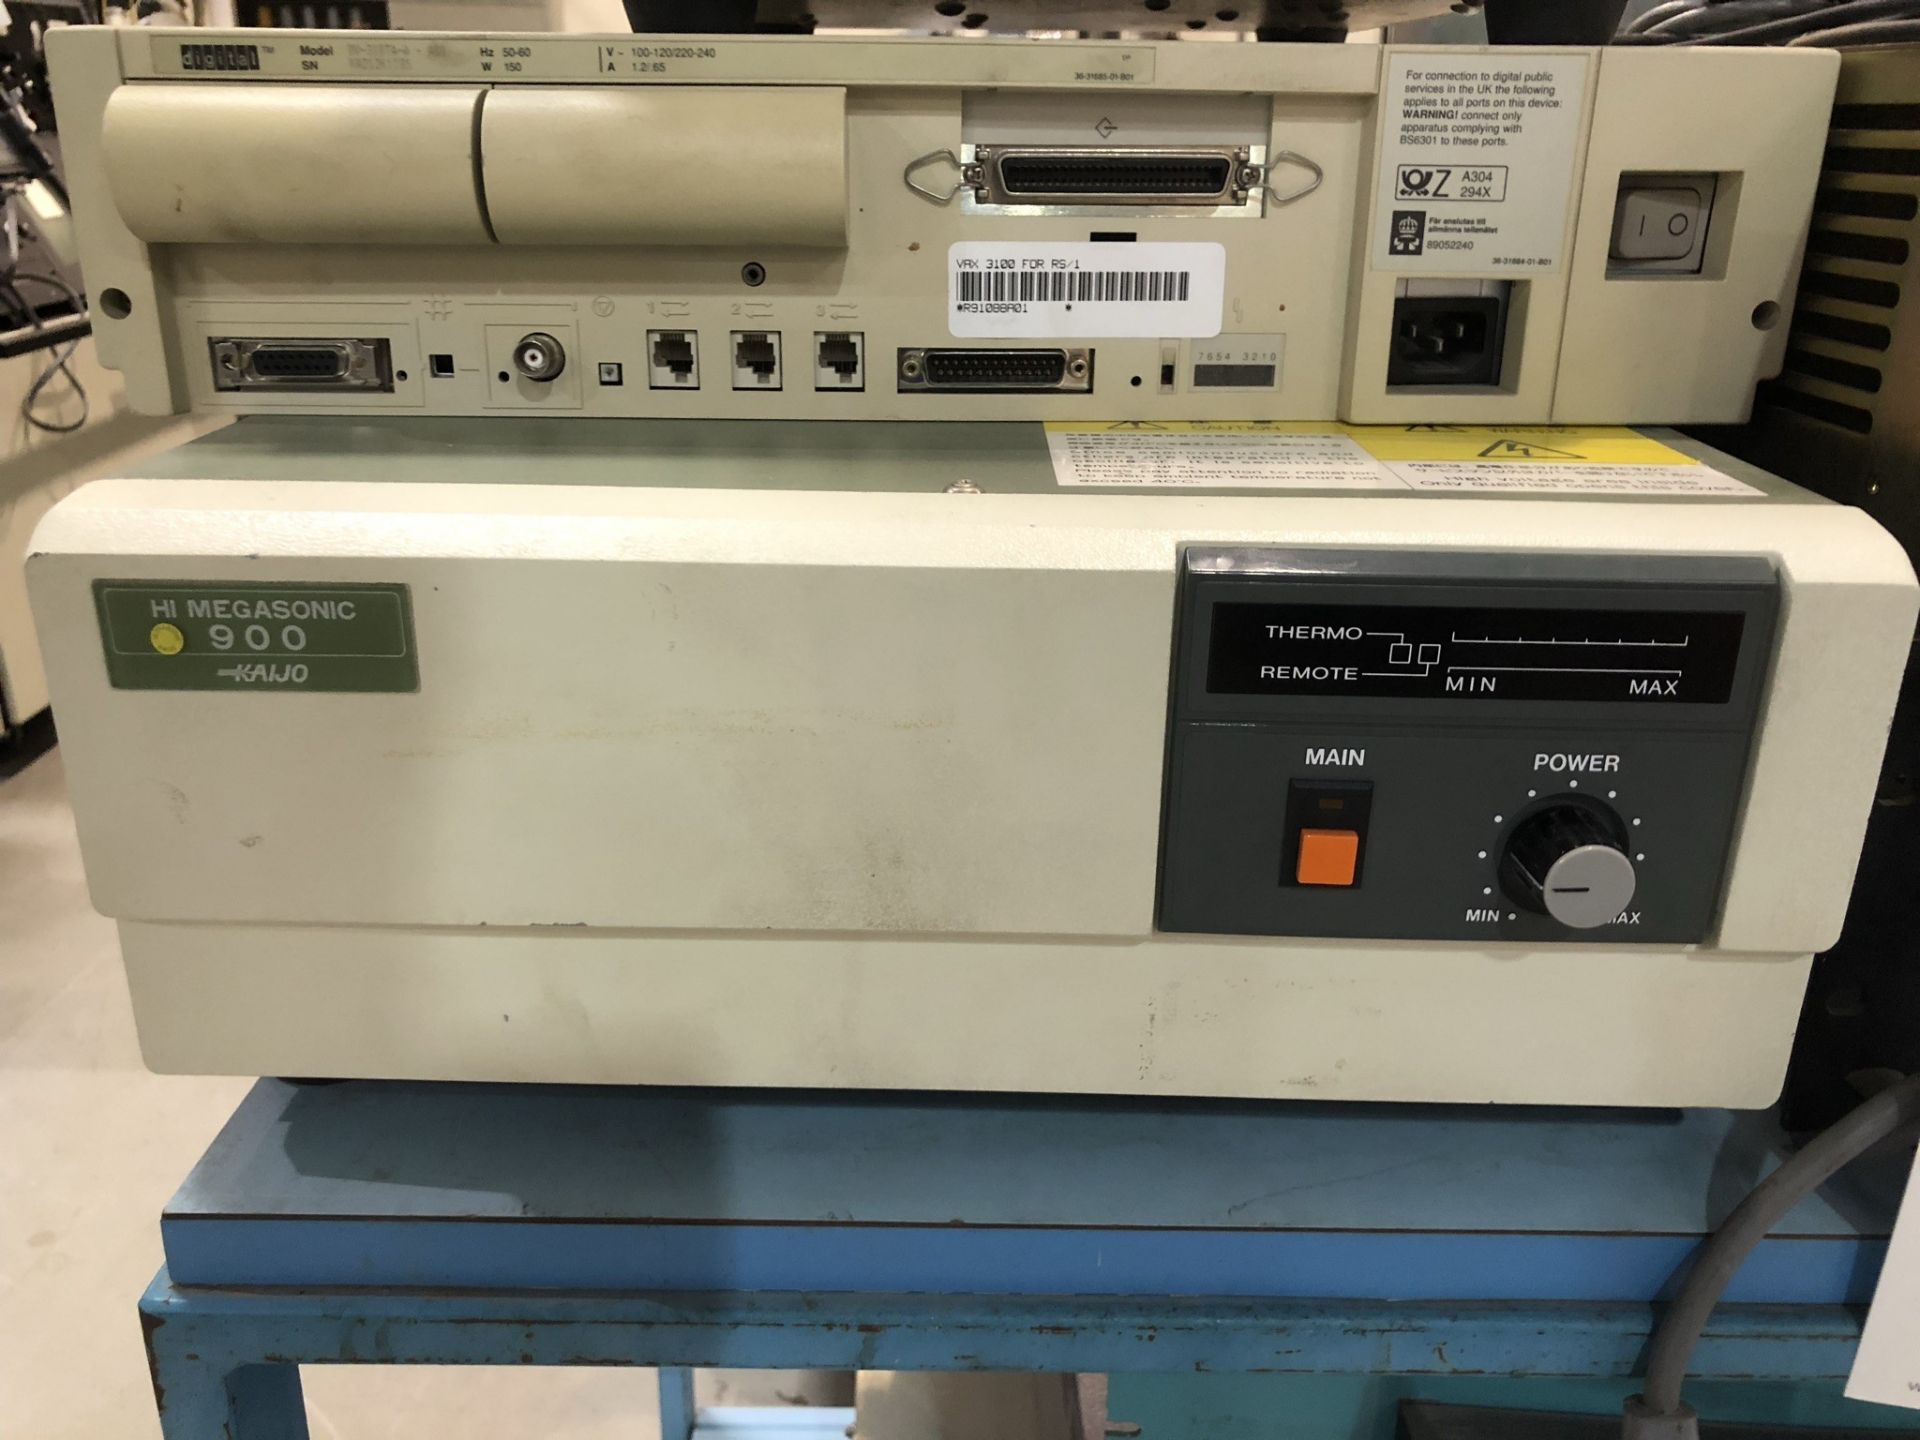 Leeds and Northrup 1300 process programmer, Dunnigan Corp Model 4501A Accelerometer, Commonwealth - Image 3 of 11